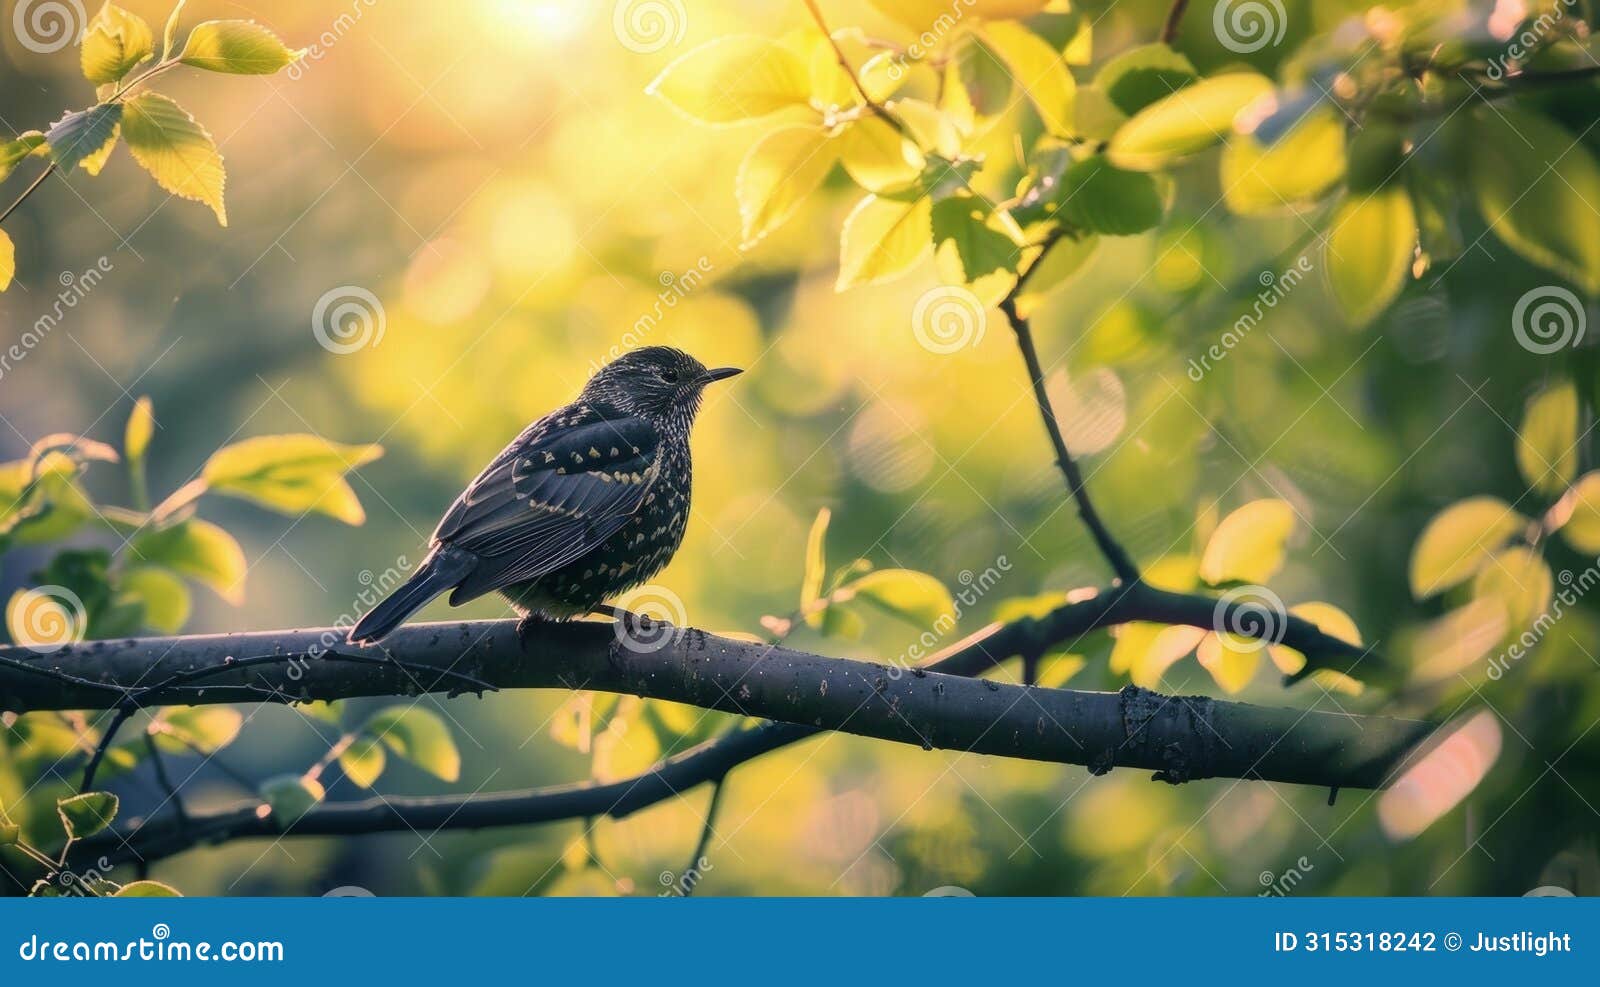 wake up to the chirping of birds and the rustling of leaves unspoiled by any distractions from the outside world. 2d